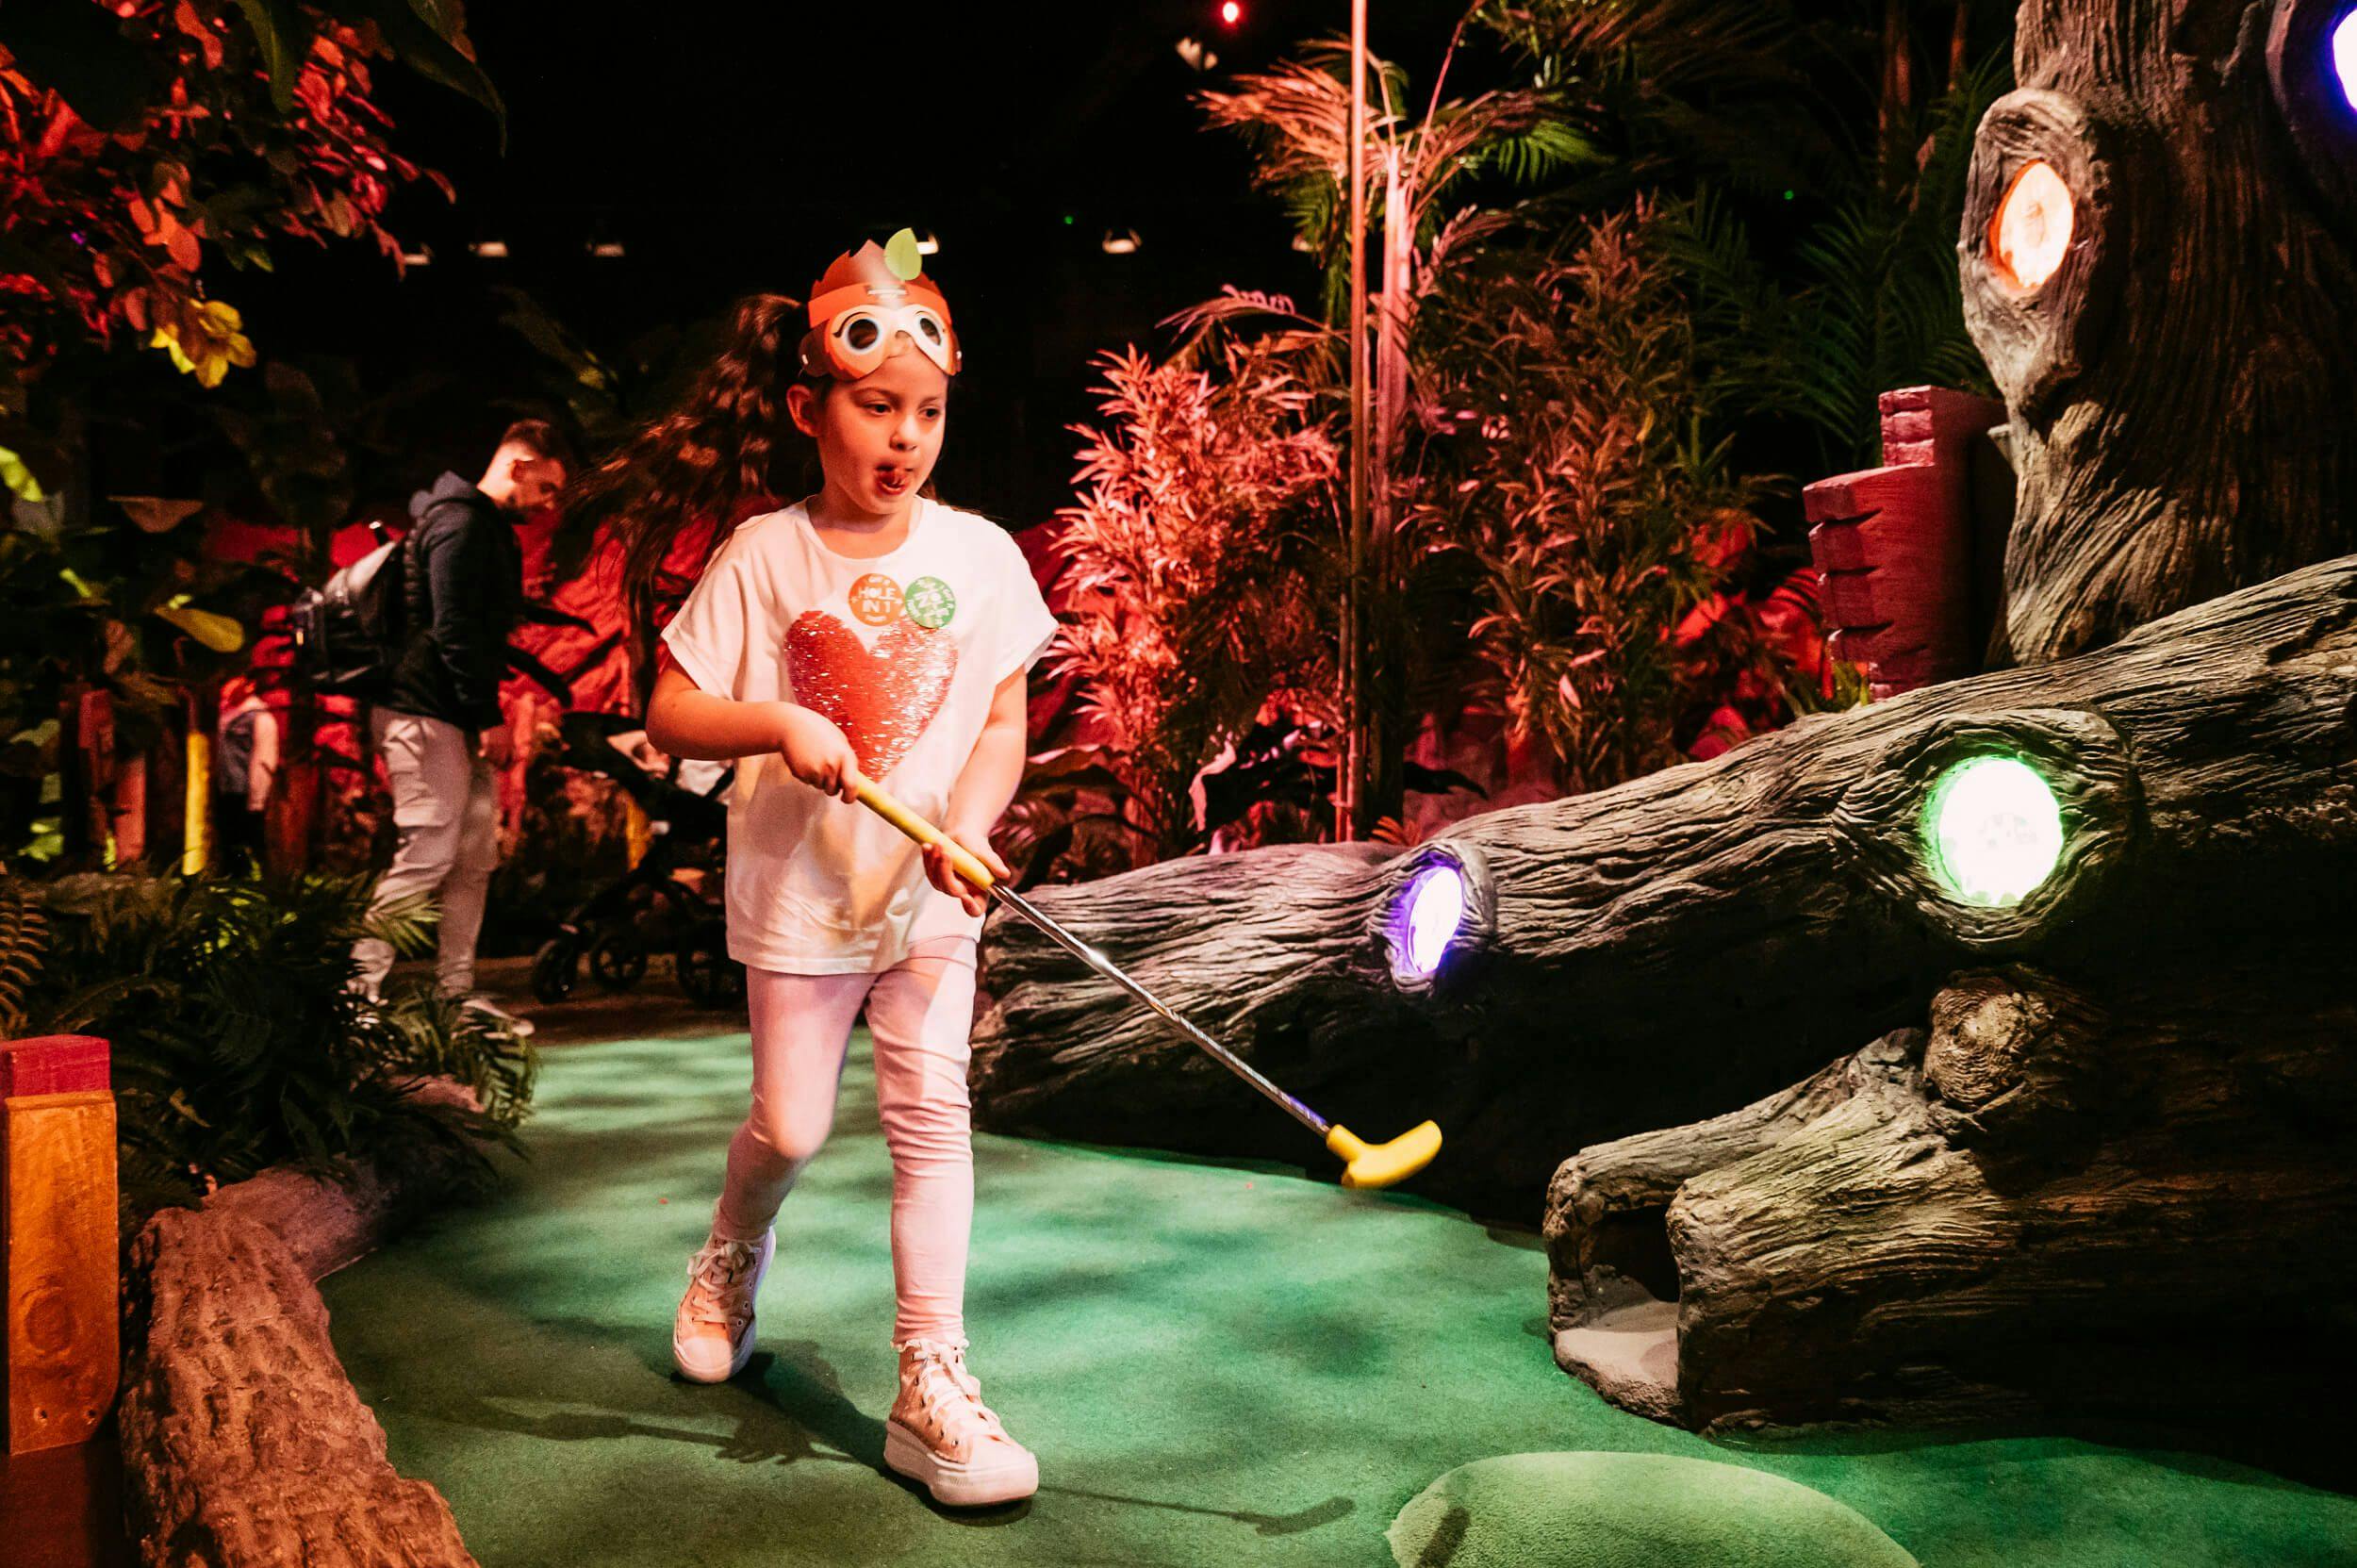 Young girl wearing a monkey mask running through the Mystic Woods with a mini golf club in her hand.